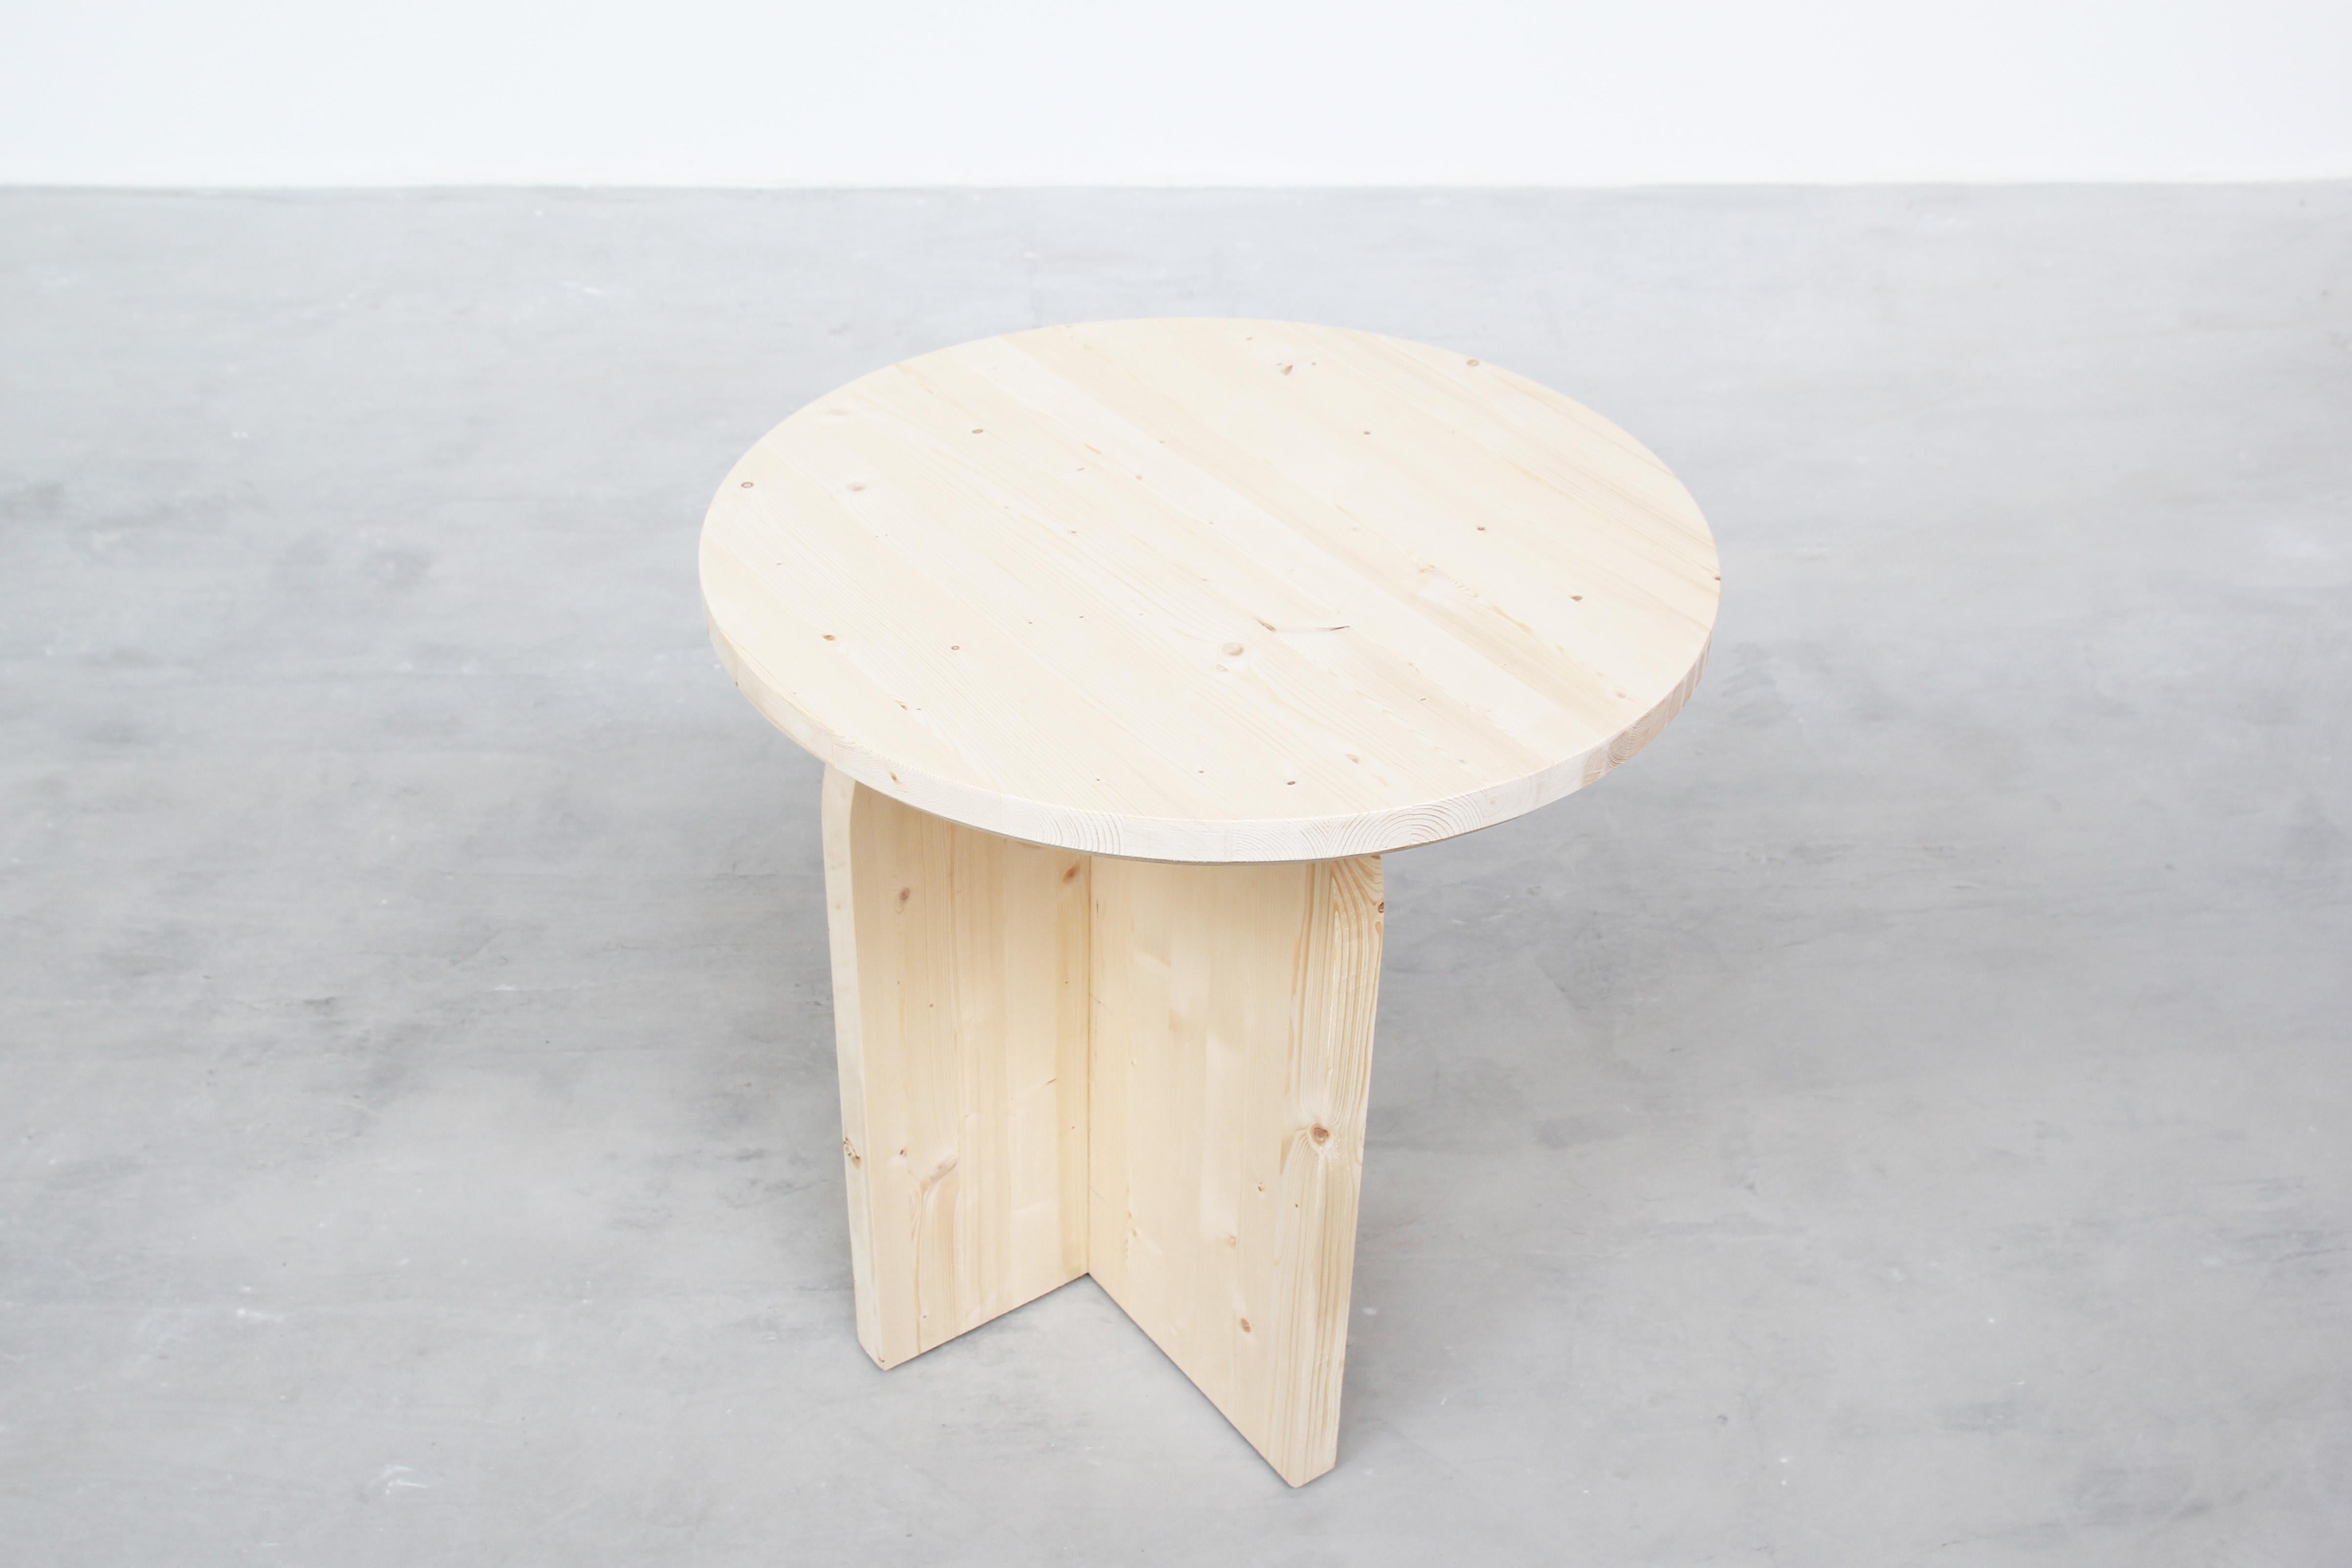 German Modern Minimalist Round Dining Table by Atelier Bachmann, 2019 For Sale